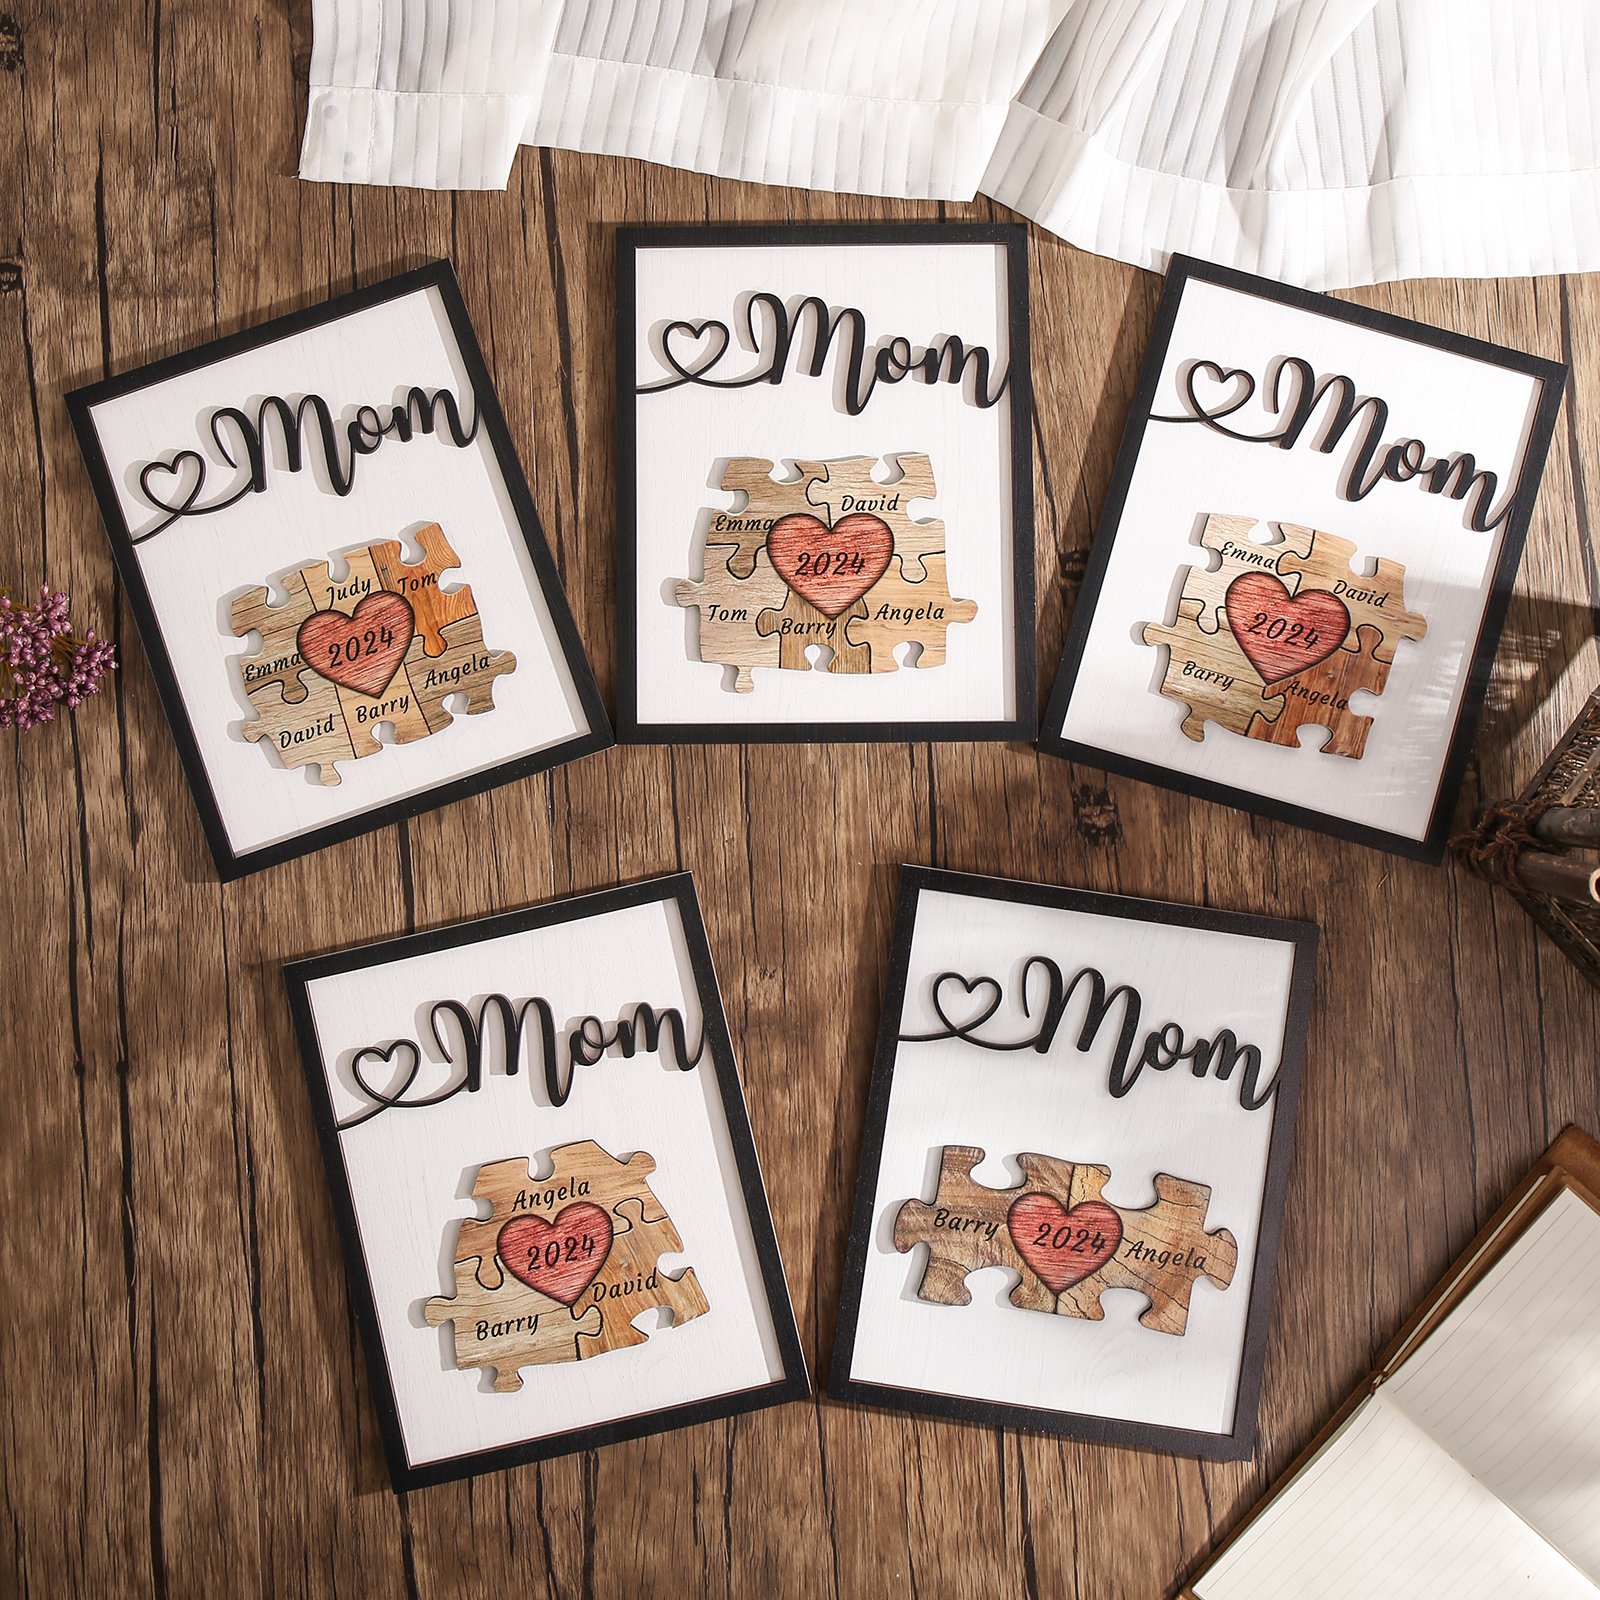 5 Names - Personalized Customizable Vintage Home Frame Wooden Decor Heart Puzzle Wooden Board Painting for Mom